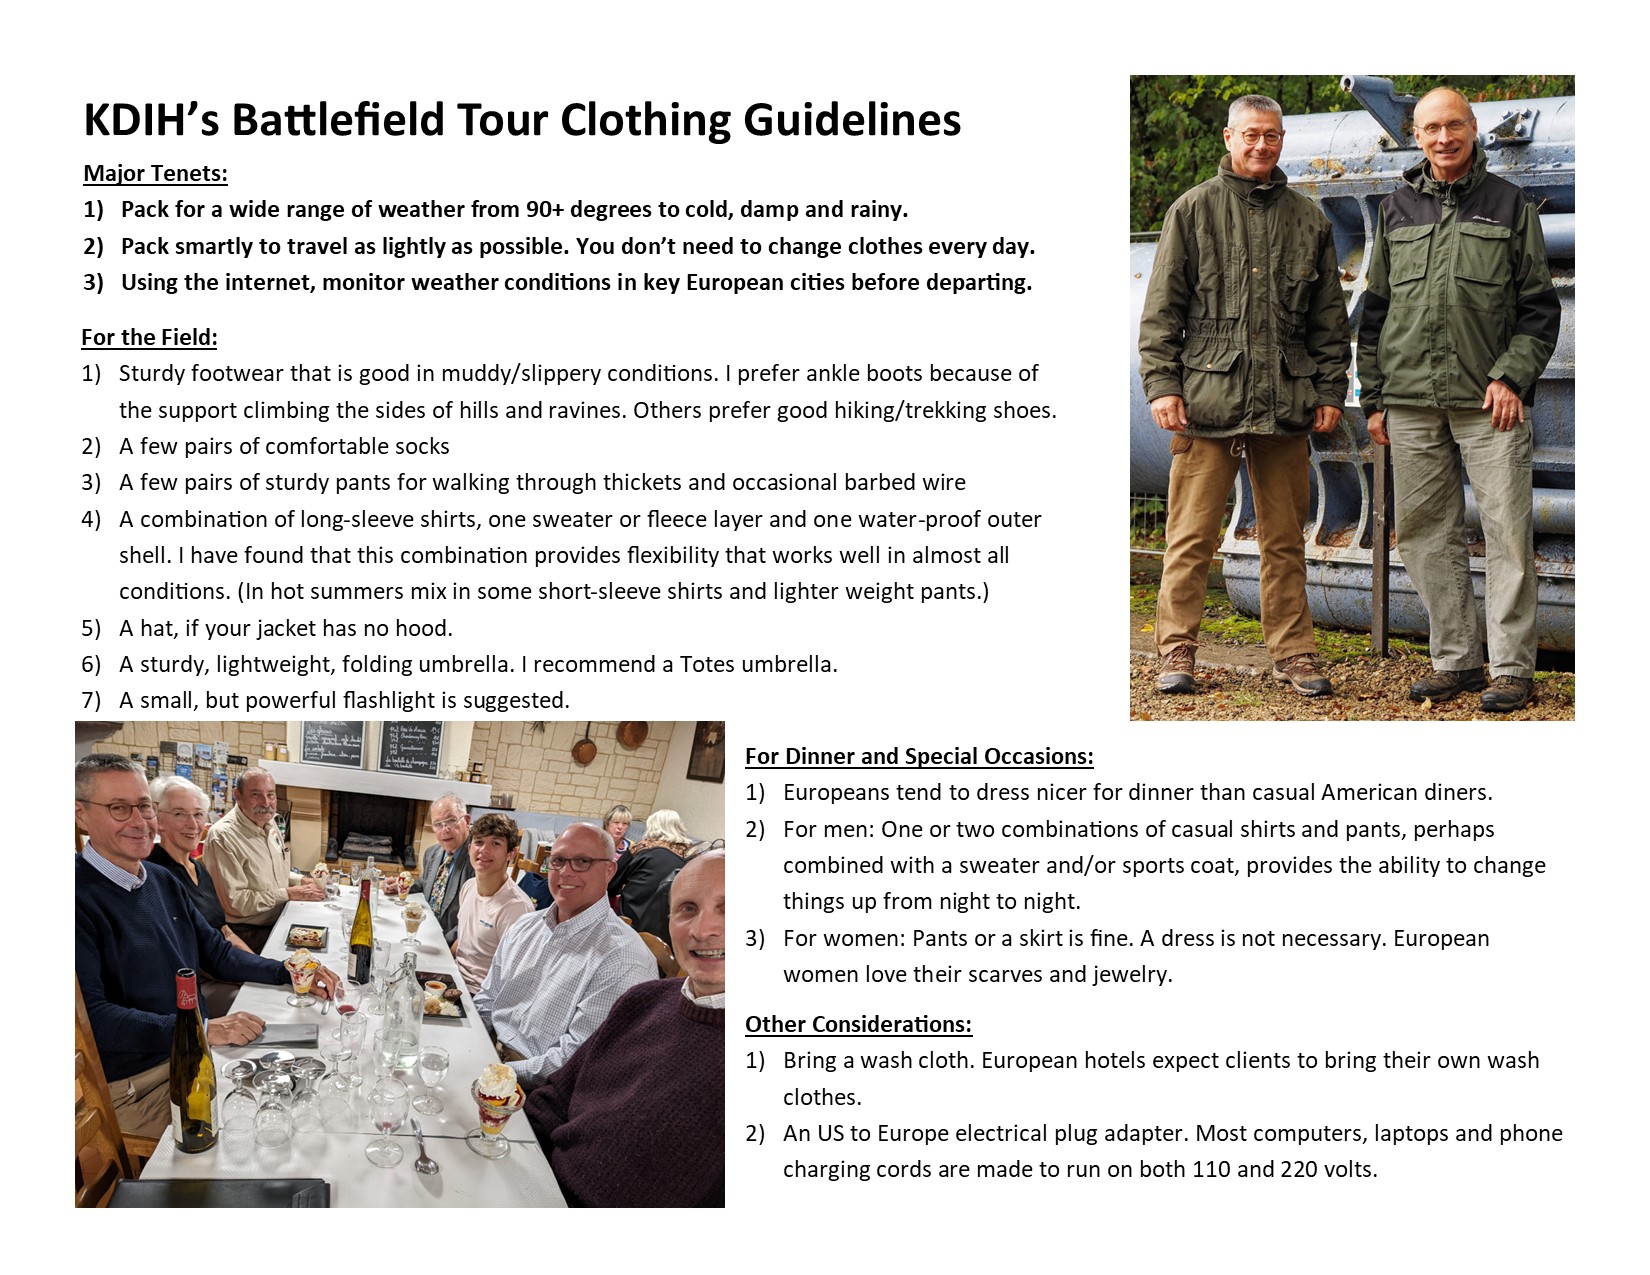 The Battlefield Clothing Guidelines provides information on what to pack for a successful battlefield tour.